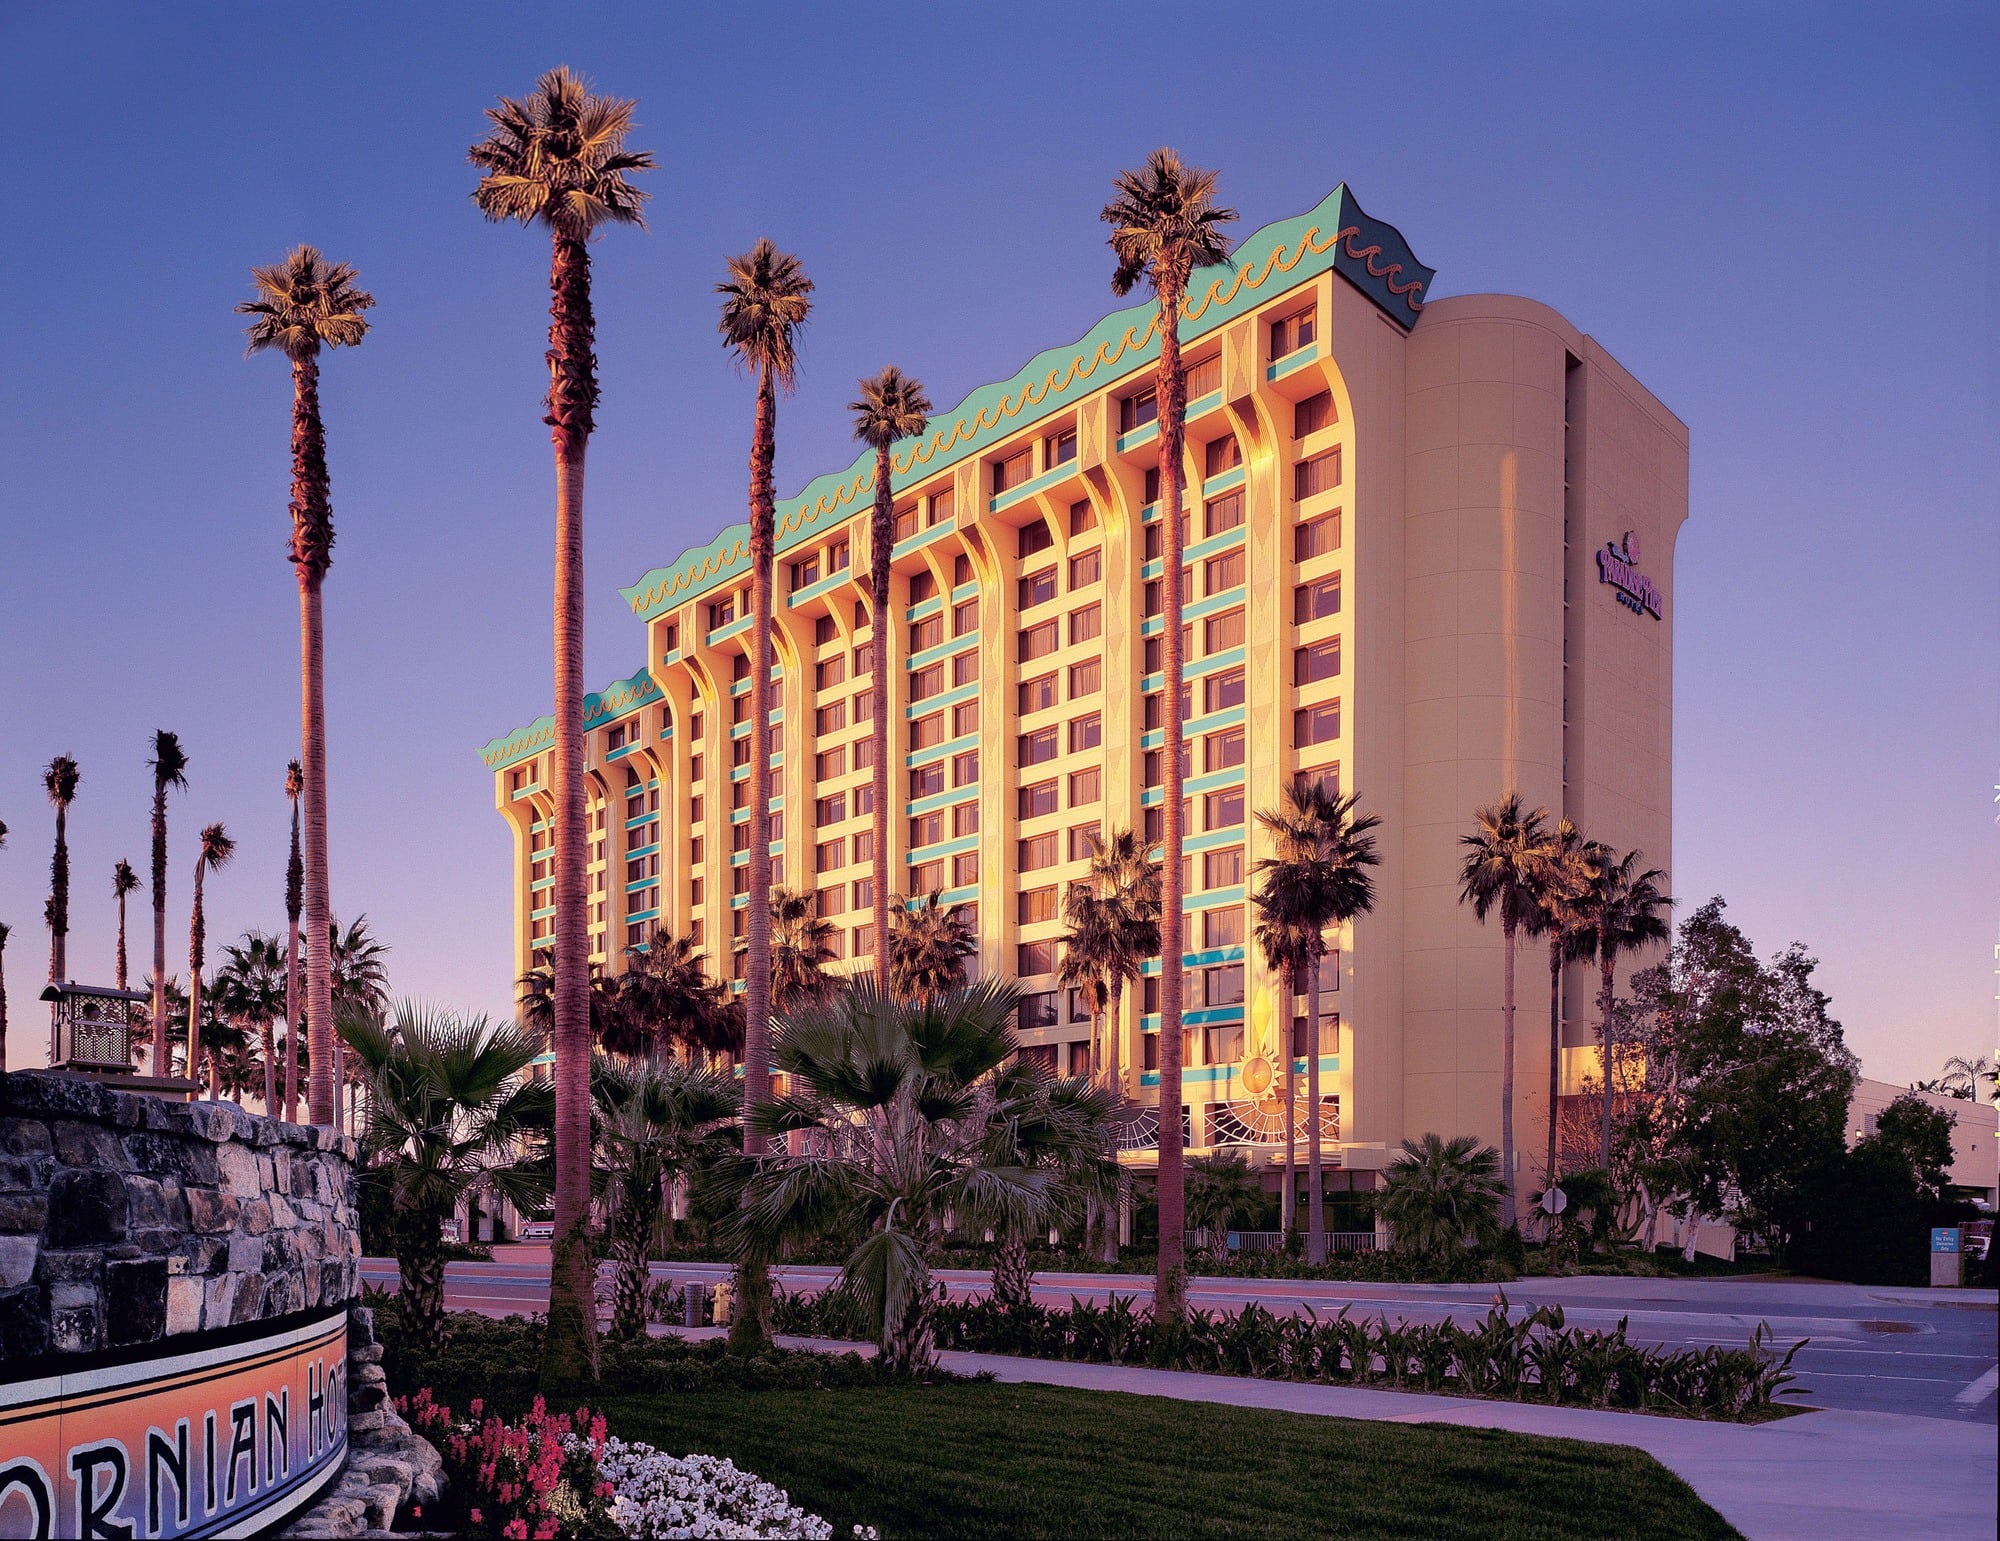 Disney's Paradise Pier Hotel tends to be the most affordable of the three Disney Resort hotels during Disneyland holiday season